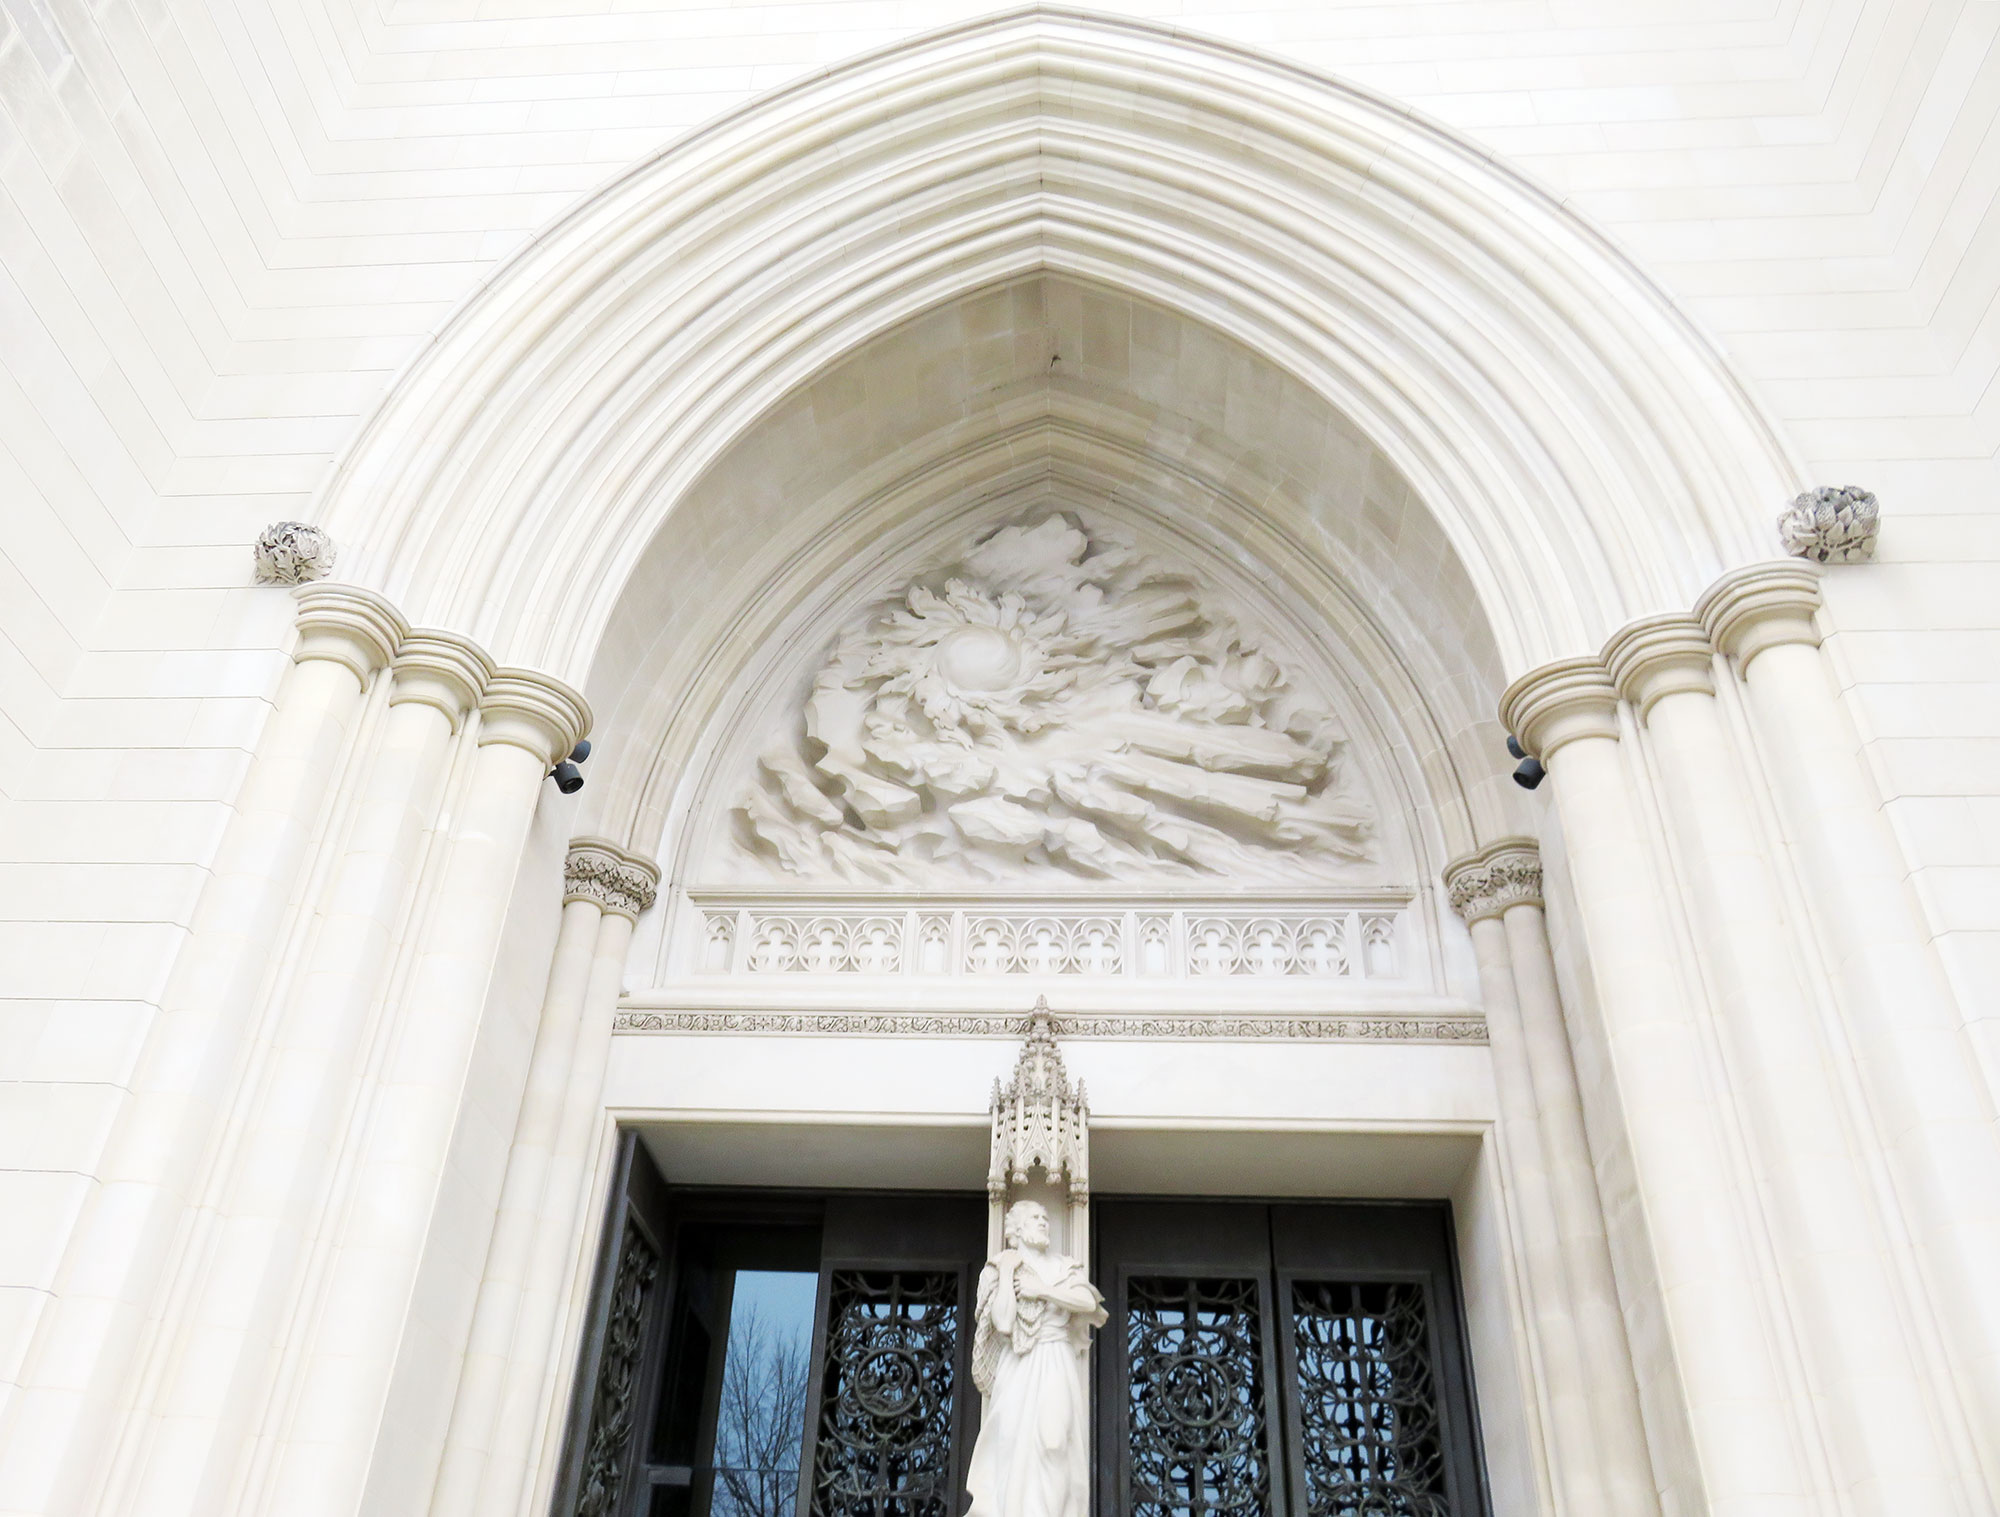 One of the main entrances of the Washington National Cathedral.